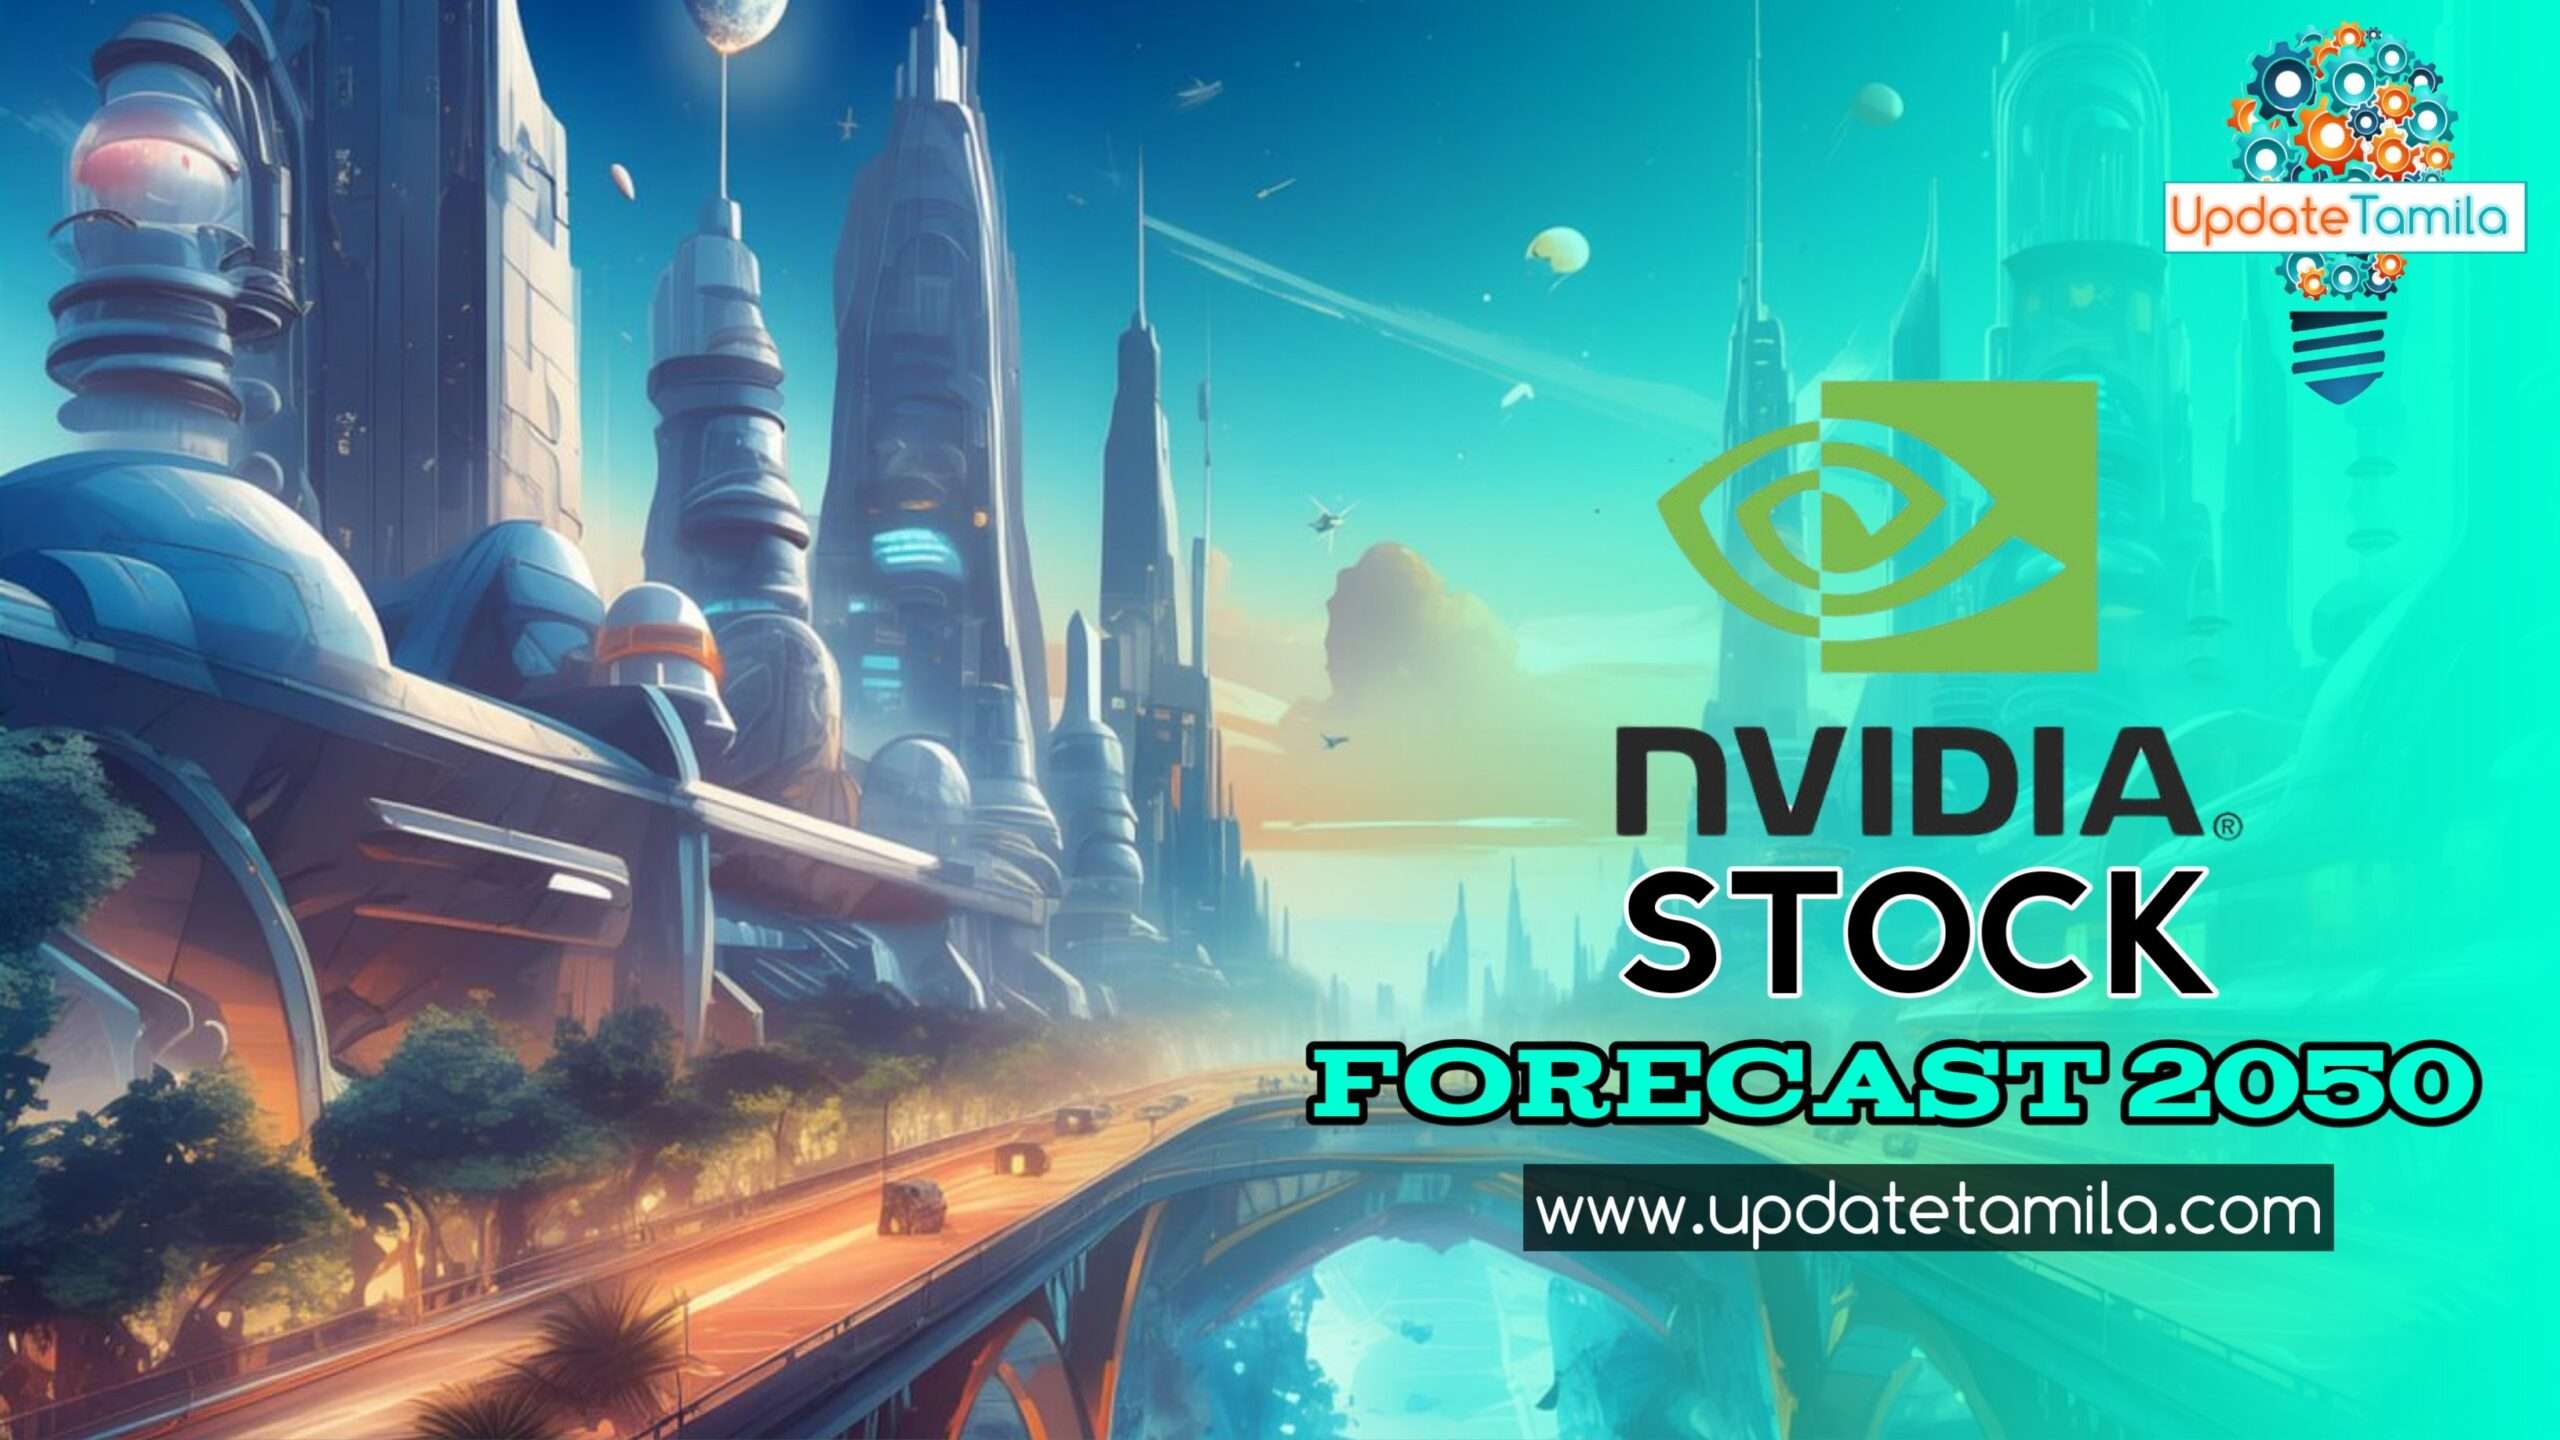 NVIDIA Stock Forecast 2050 : Risks and Opportunities